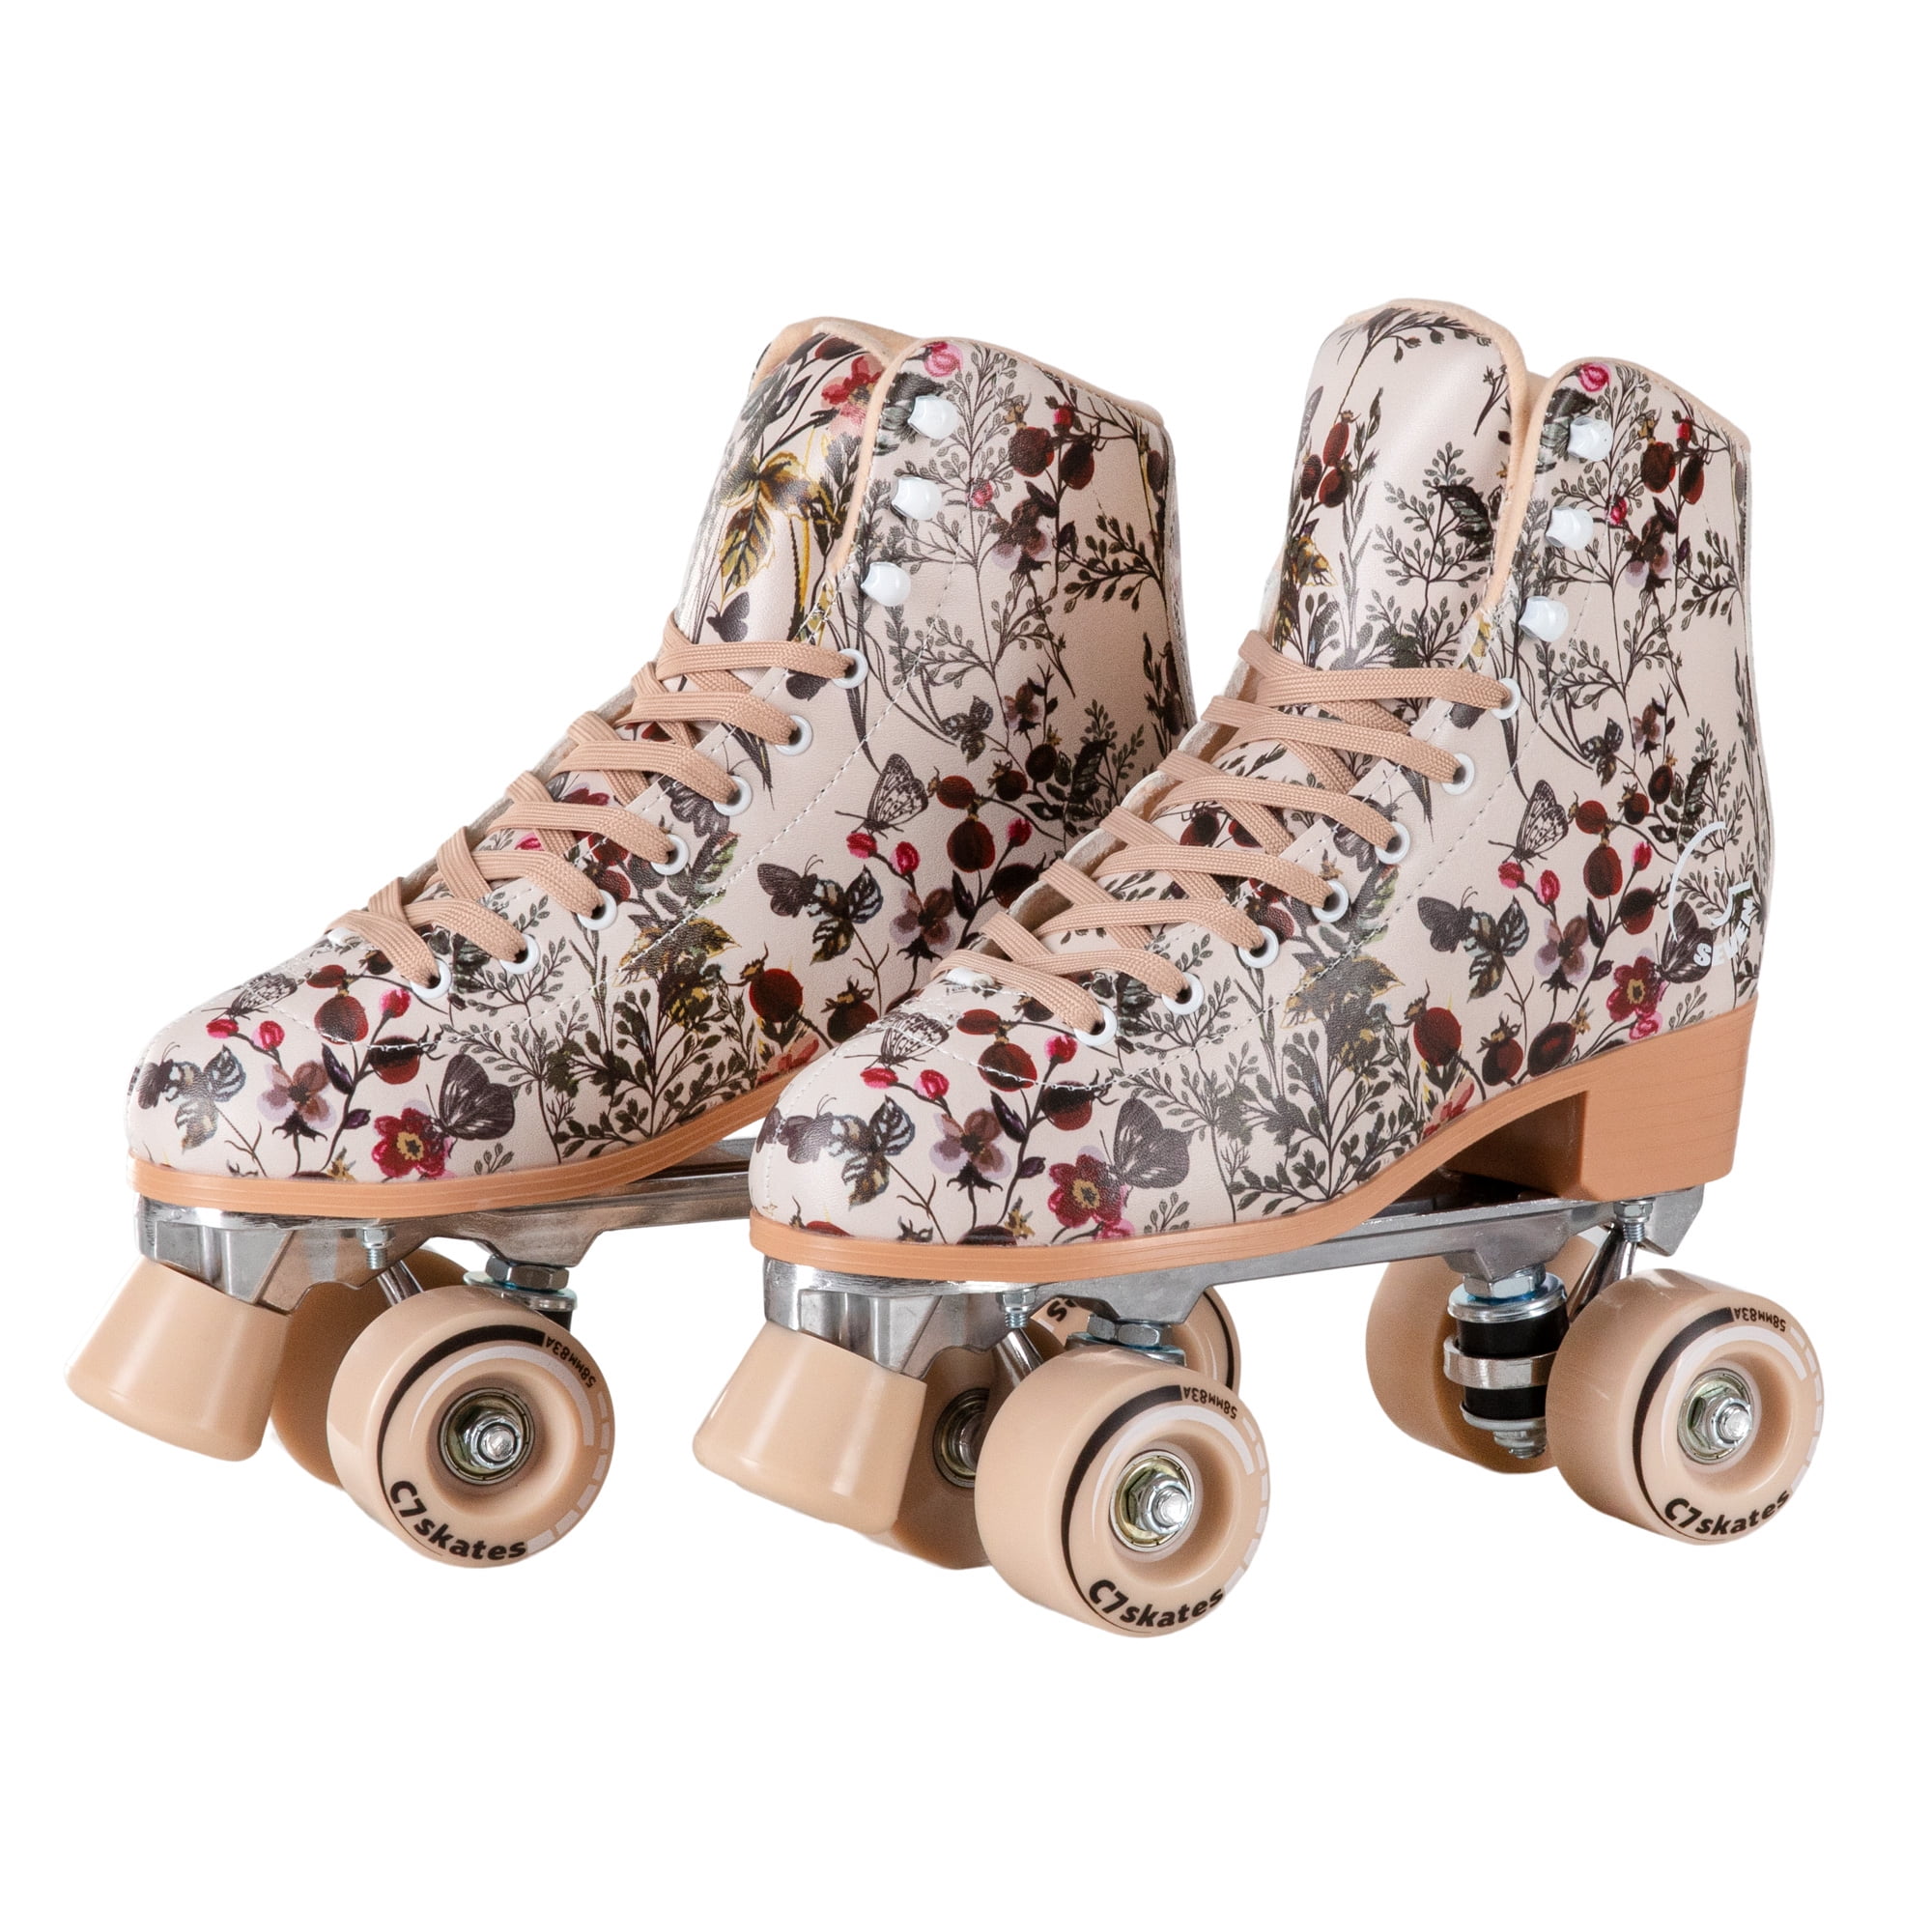 Details about   Roller Skate Roller Quad 4 Wheels Shoes Outdoor Sports Exercise High Cut Unisex 